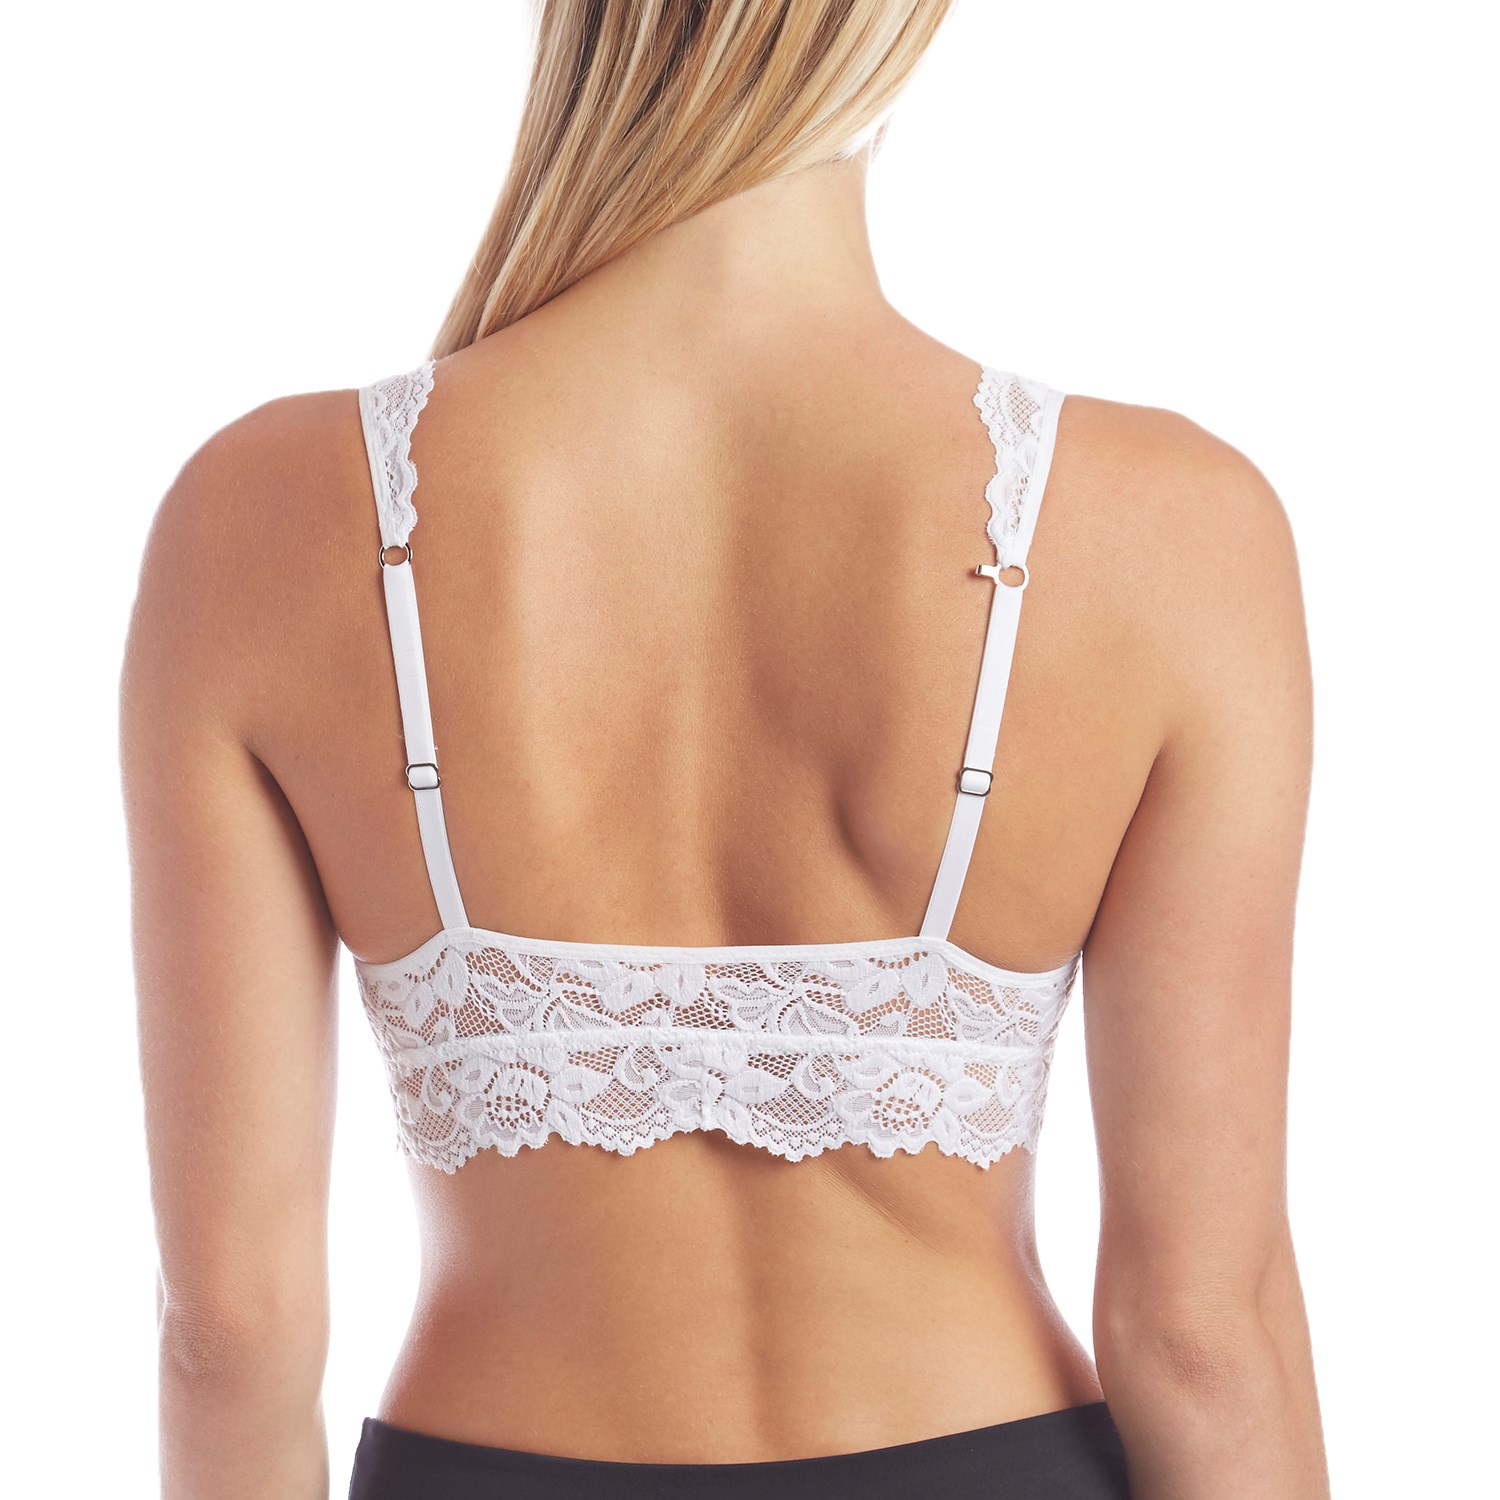 https://images.evo.com/imgp/zoom/123117/533271/undie-couture-wide-strap-lace-bralette-women-s-.jpg